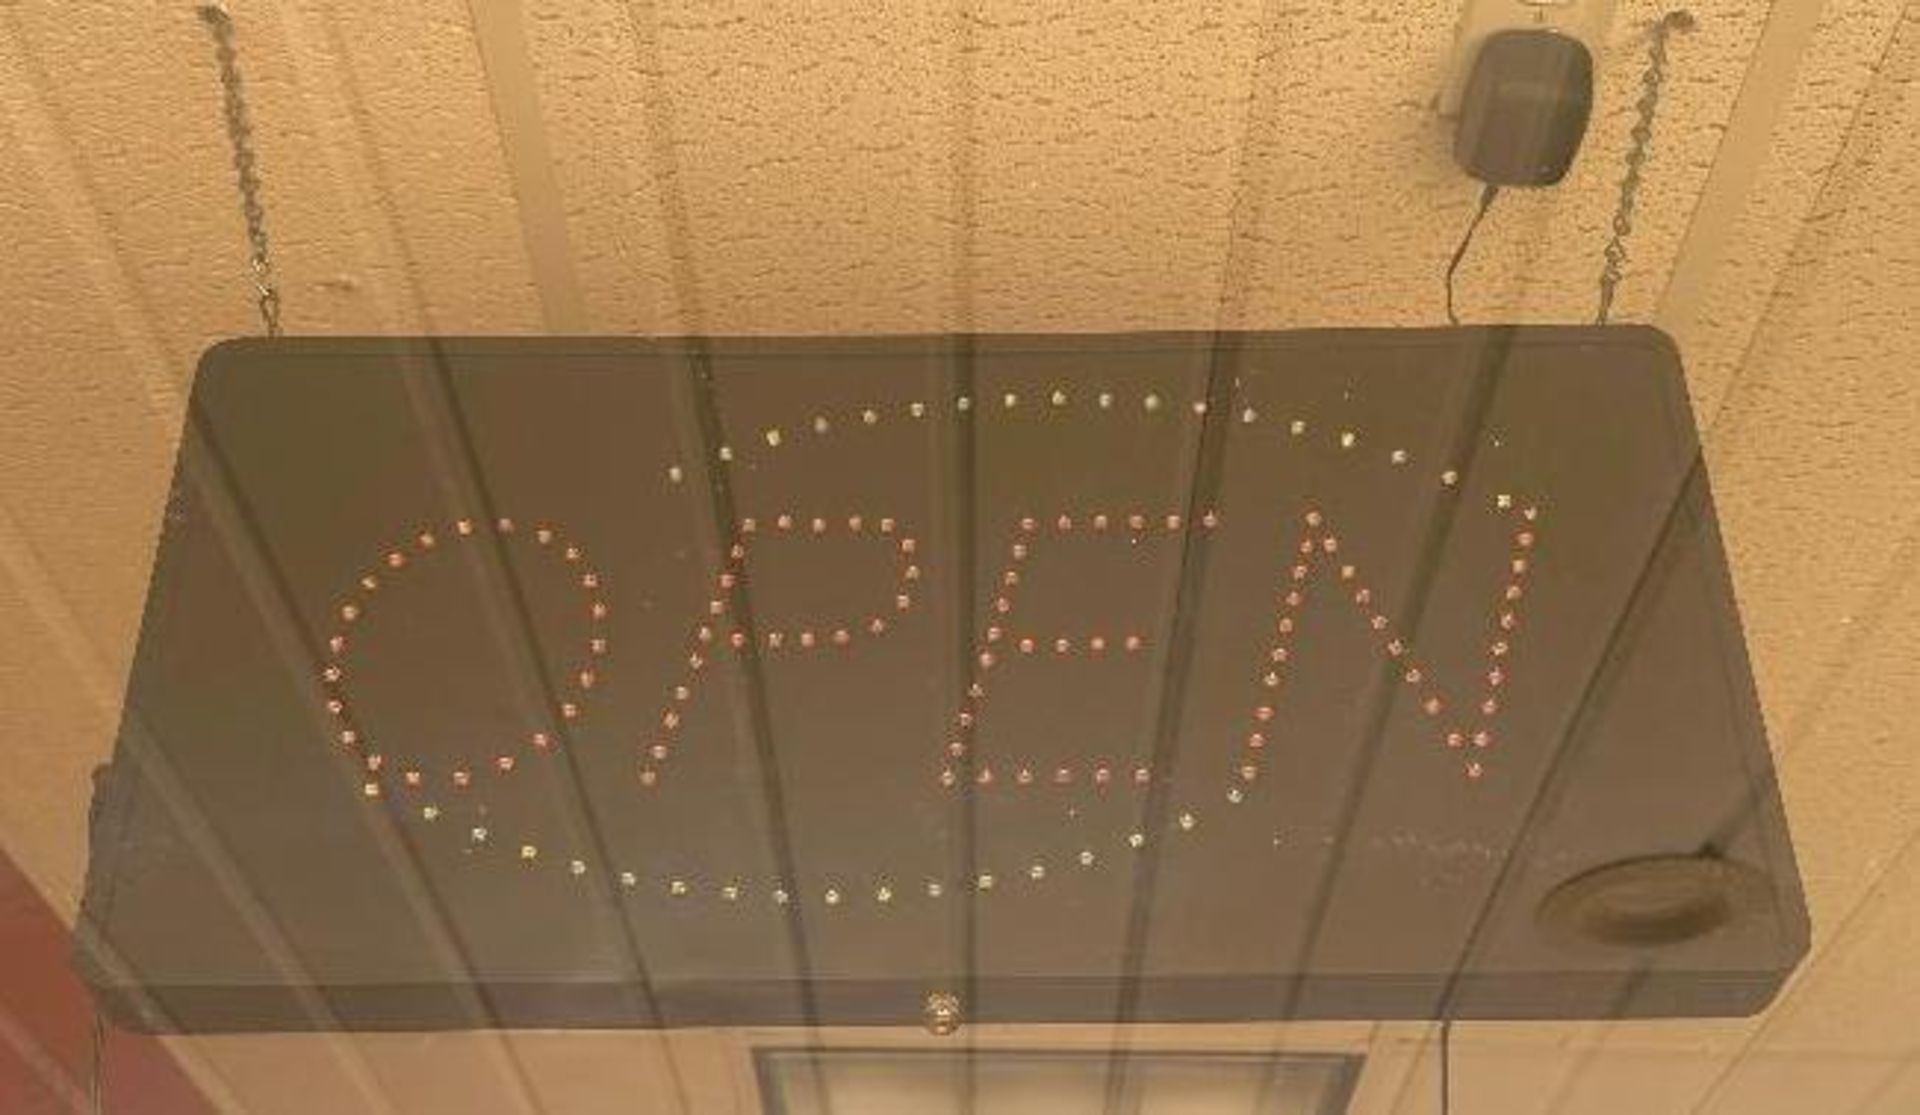 DESCRIPTION LED " OPEN " SIGN W/ POWER CORD. ADDITIONAL INFORMATION IN WORKING ORDER. LOCATION 2110